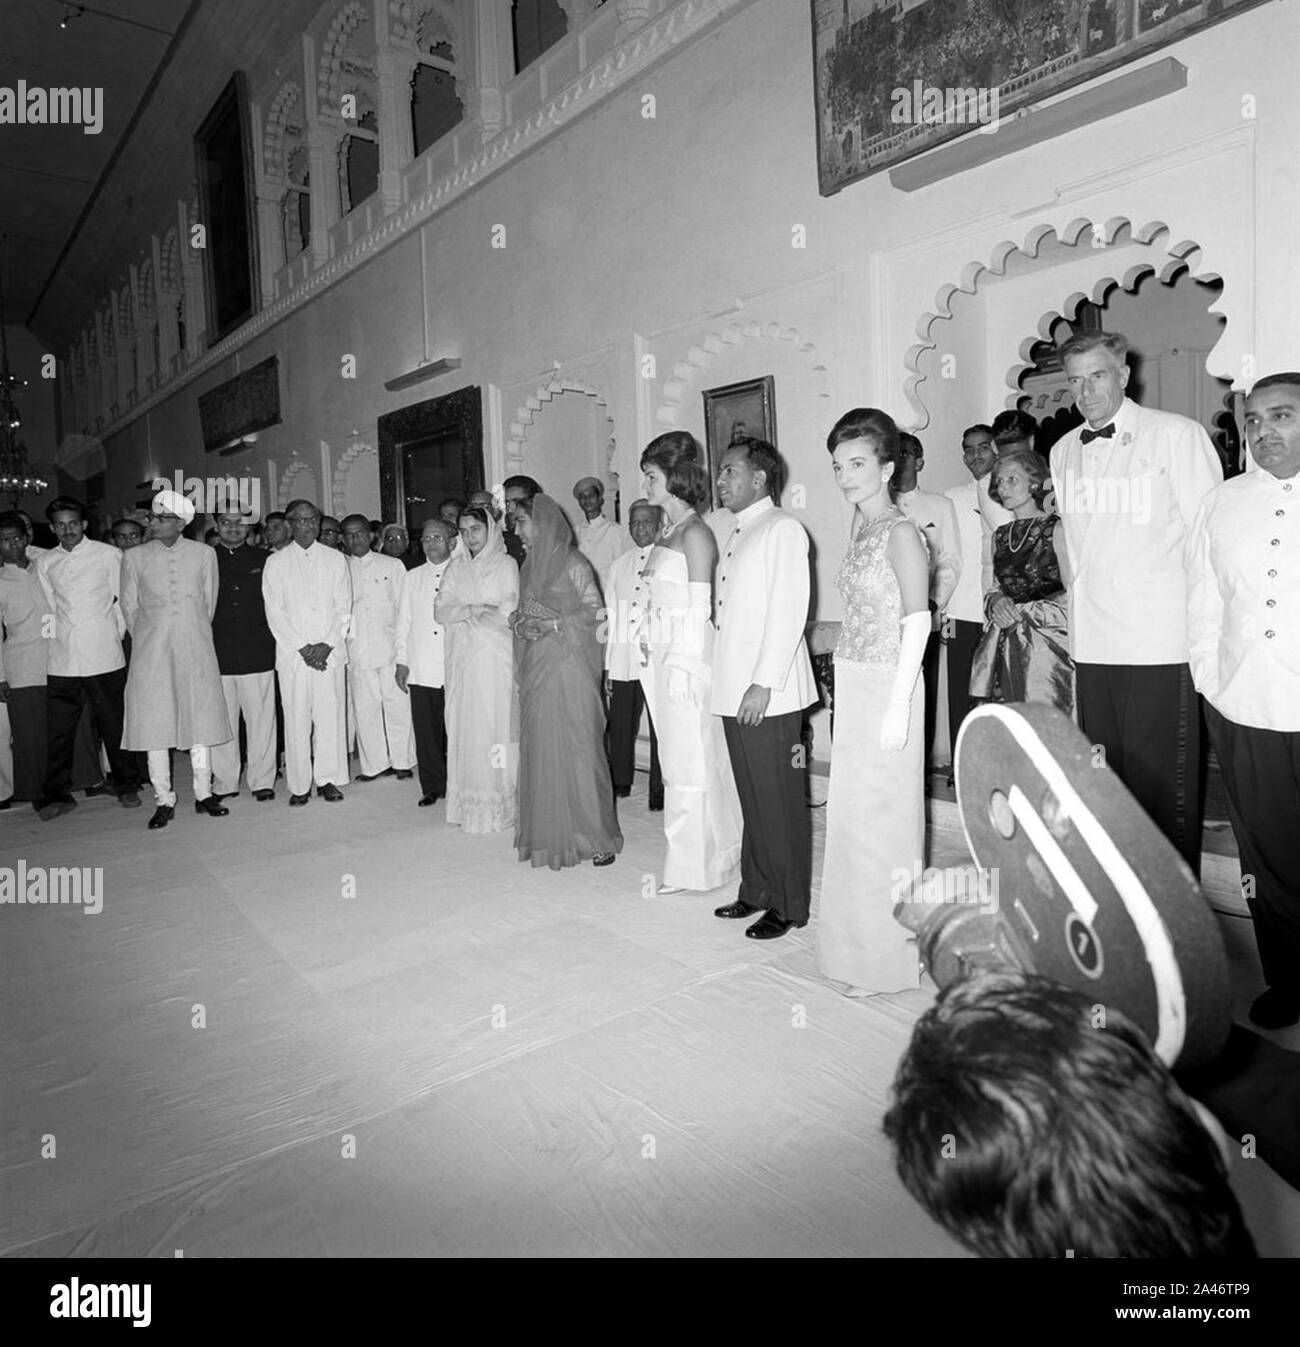 First Lady Jacqueline Kennedy besucht Empfang in Udaipur, Indien (2). Stockfoto